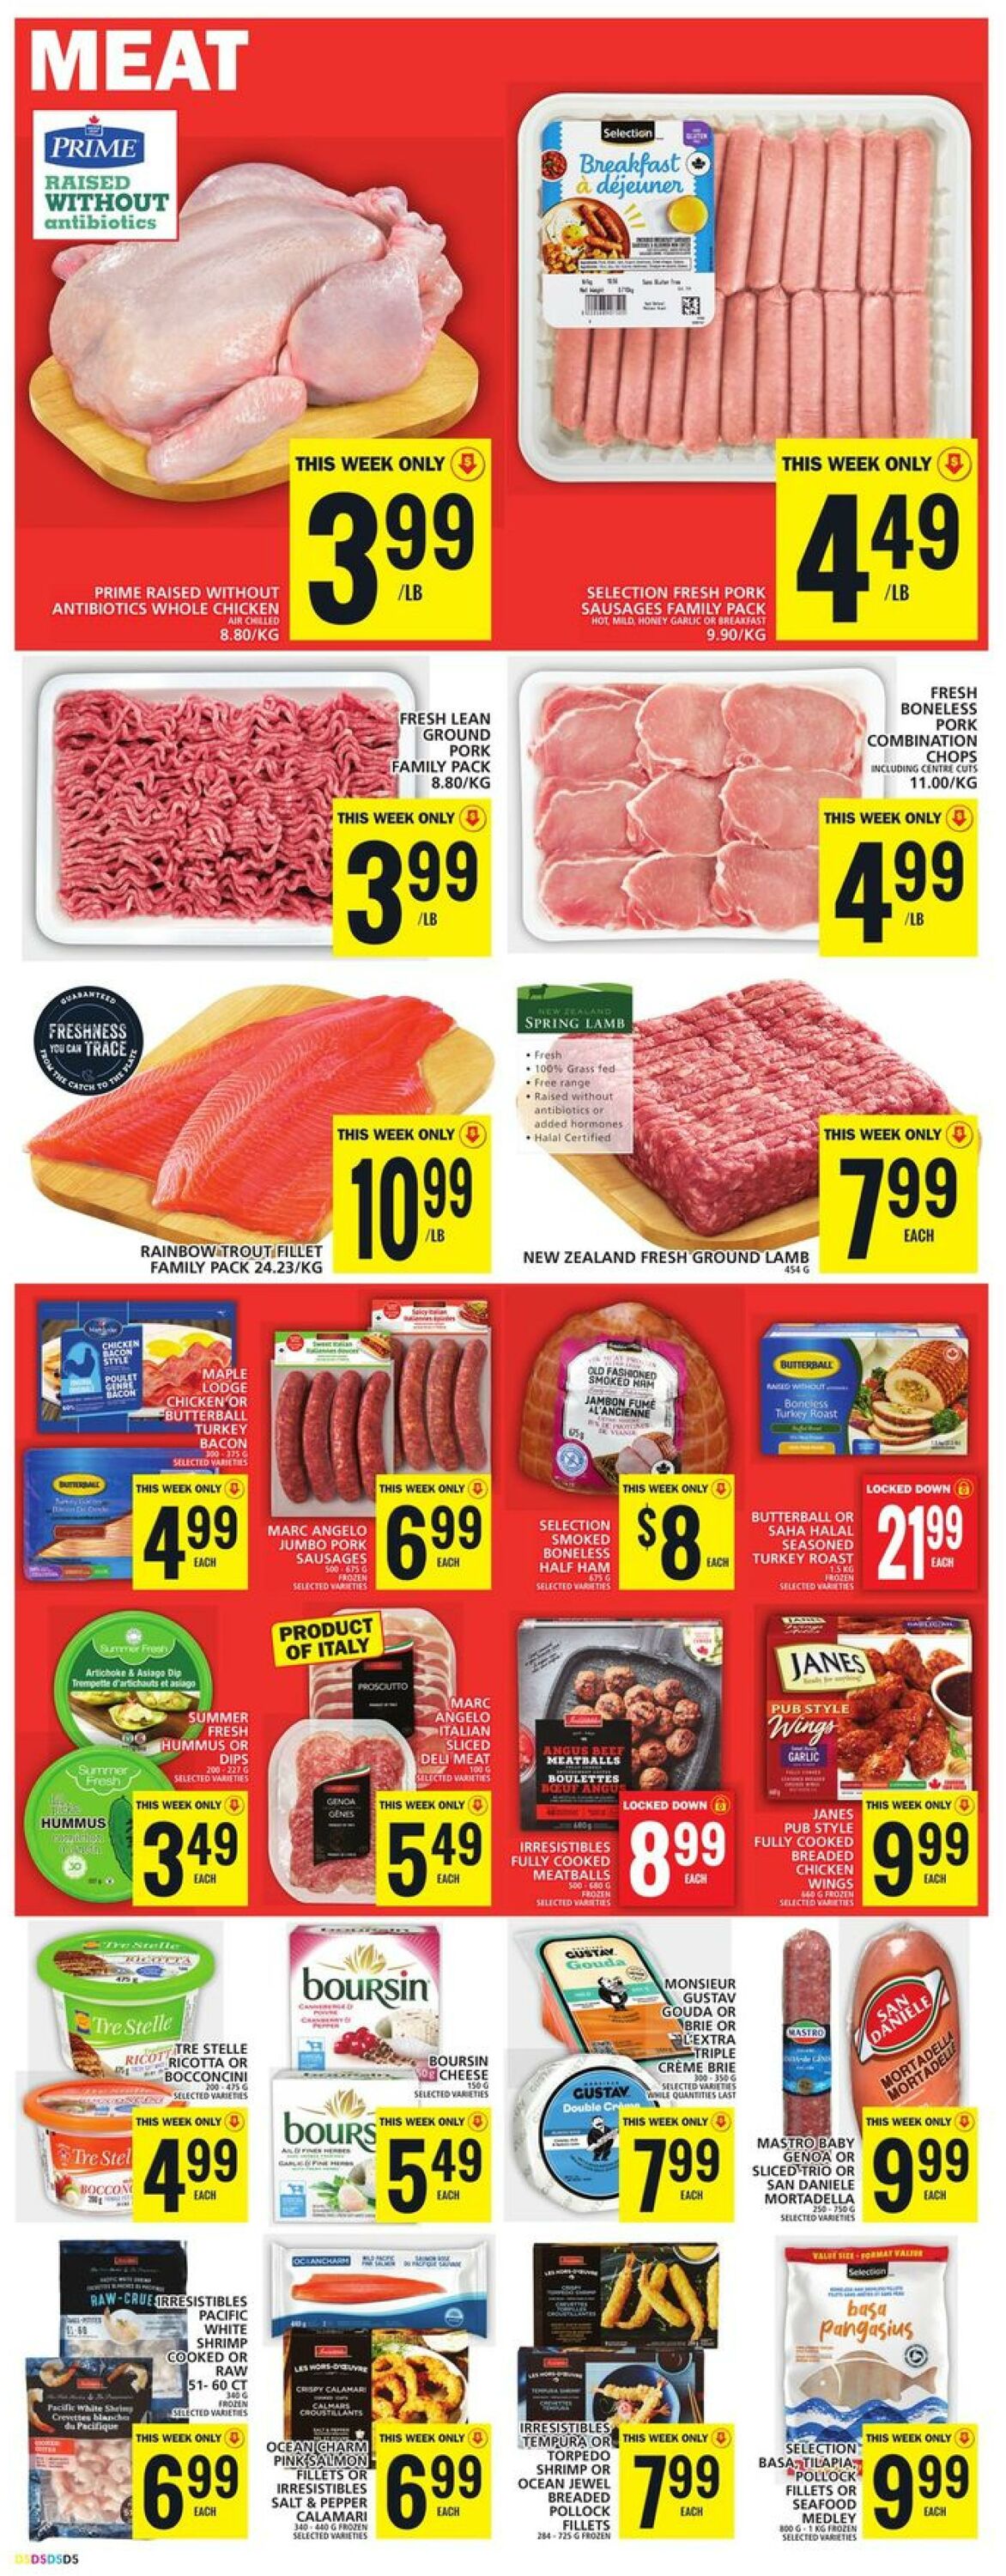 Food Basics Promotional Flyer - Christmas - Valid from 21.12 to 27.12 ...